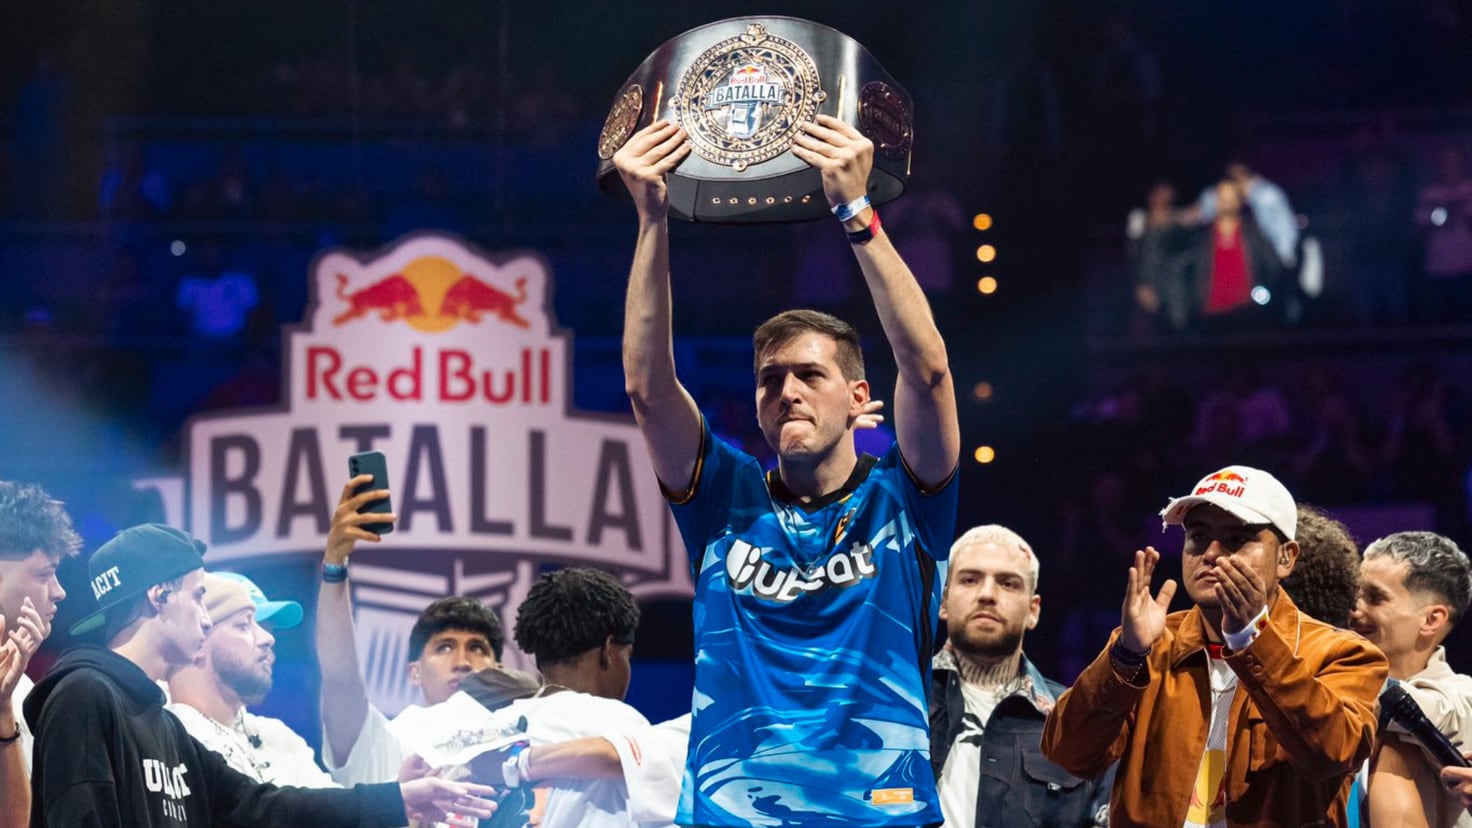 All the Spaniards who have won the Red Bull International Battle
